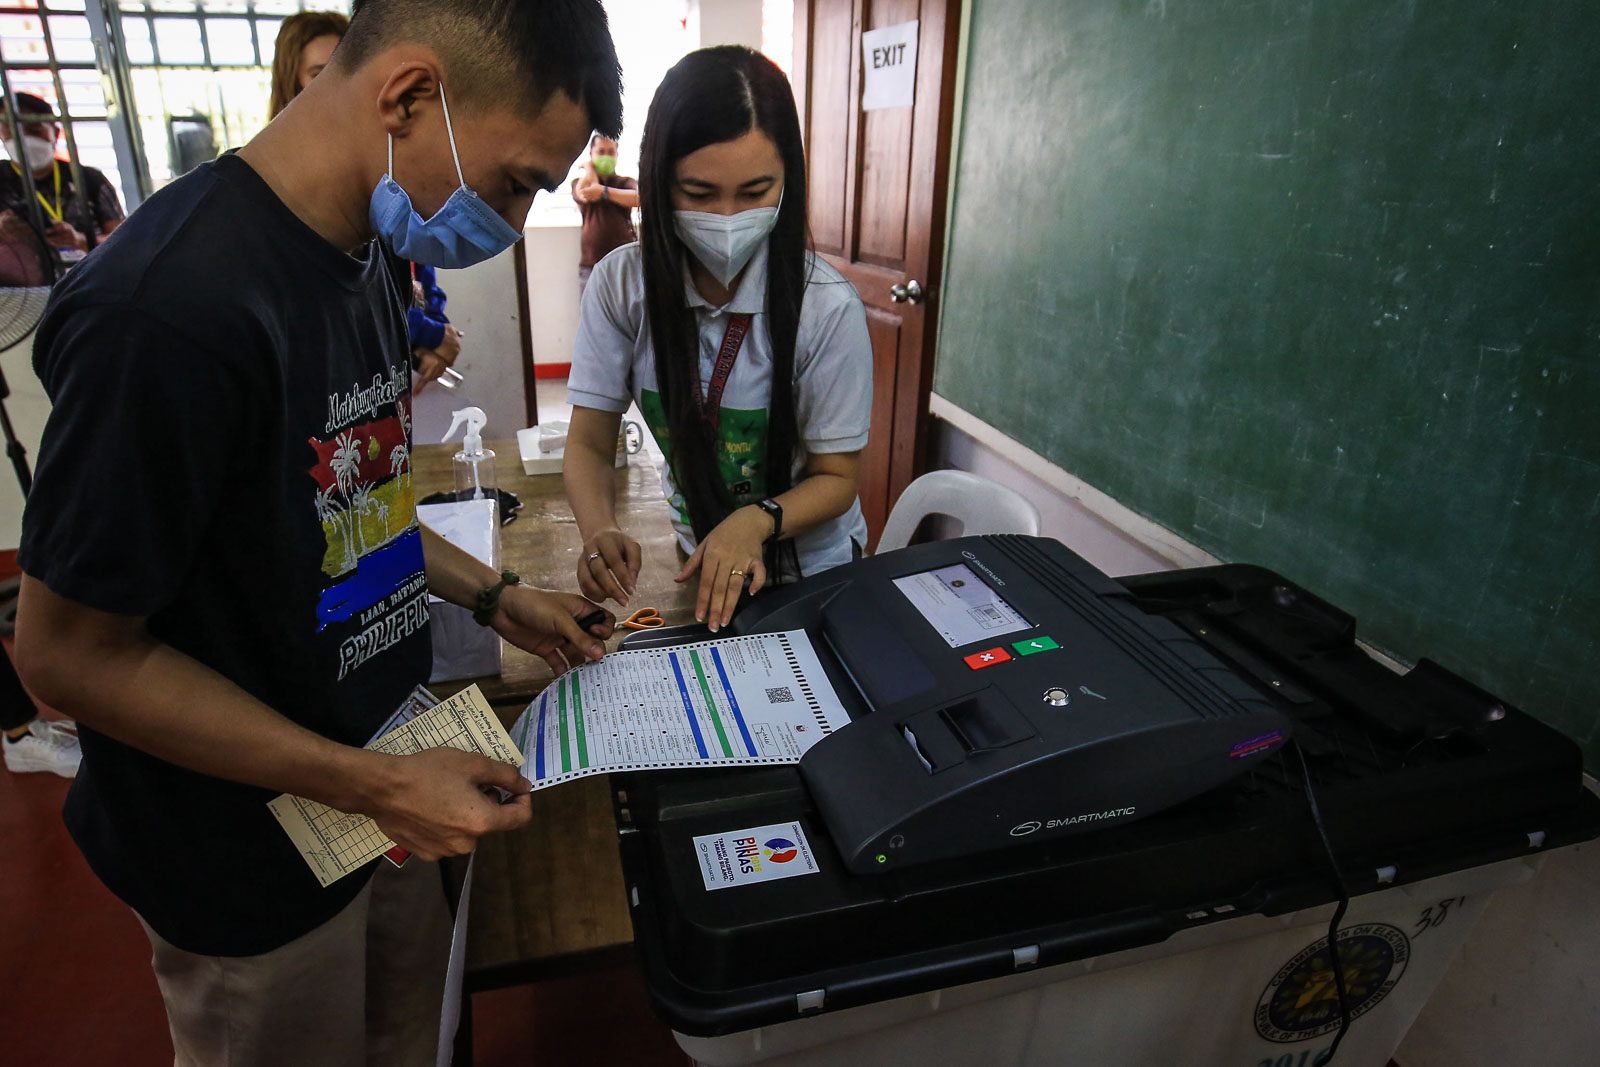 Comelec to ensure sufficient power supply for 2022 polls